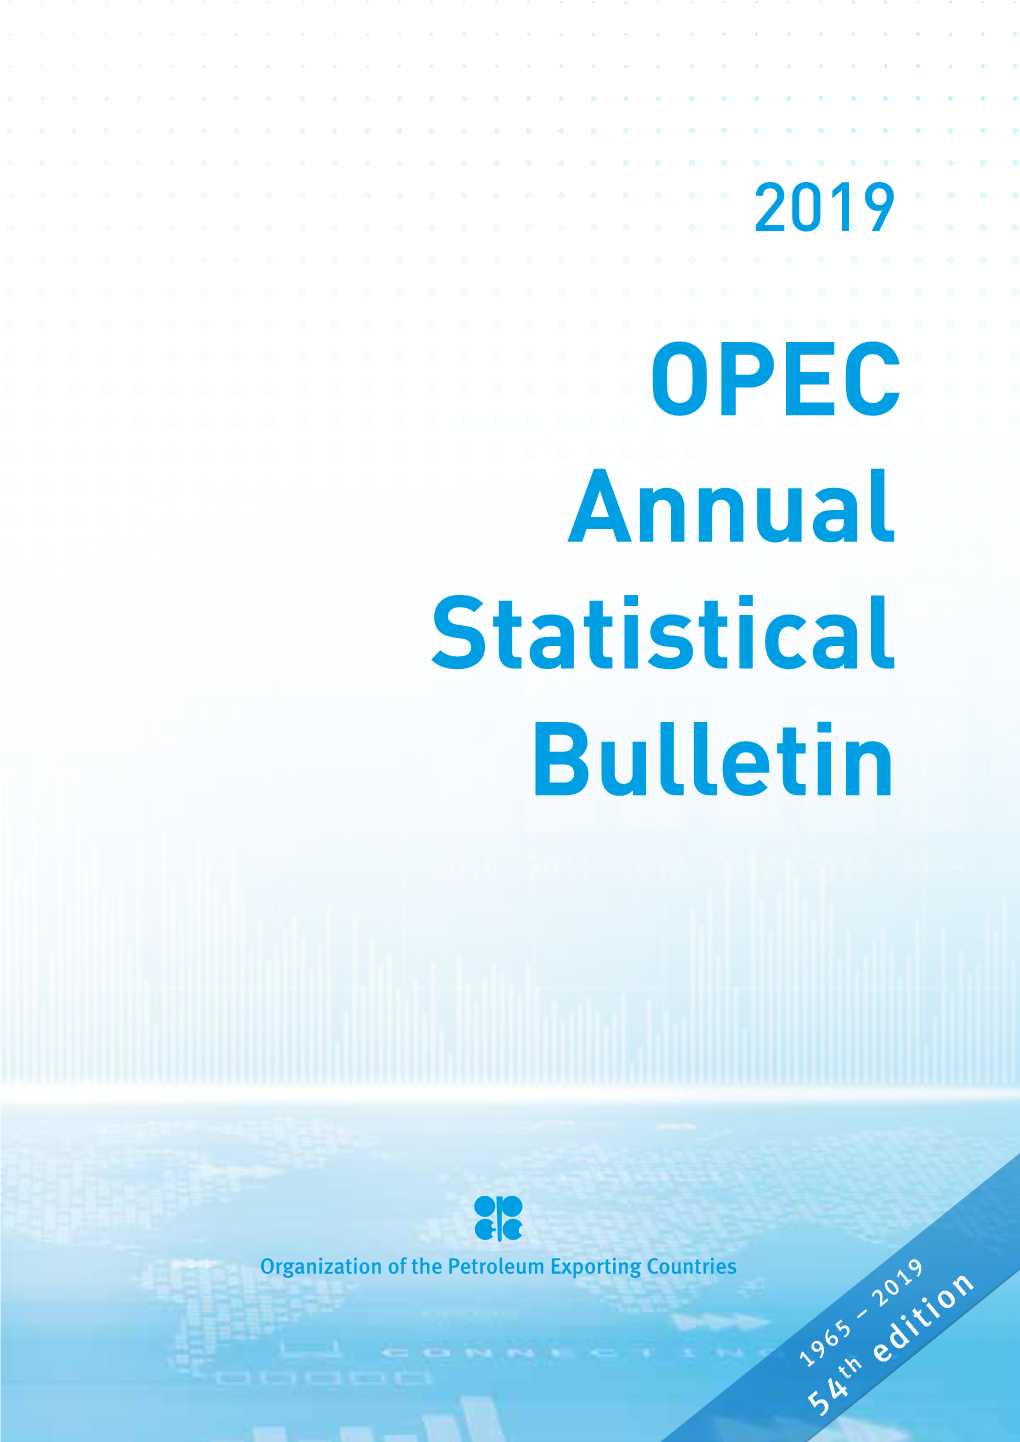 OPEC Annual Statistical Bulletin 2019 1 Contents